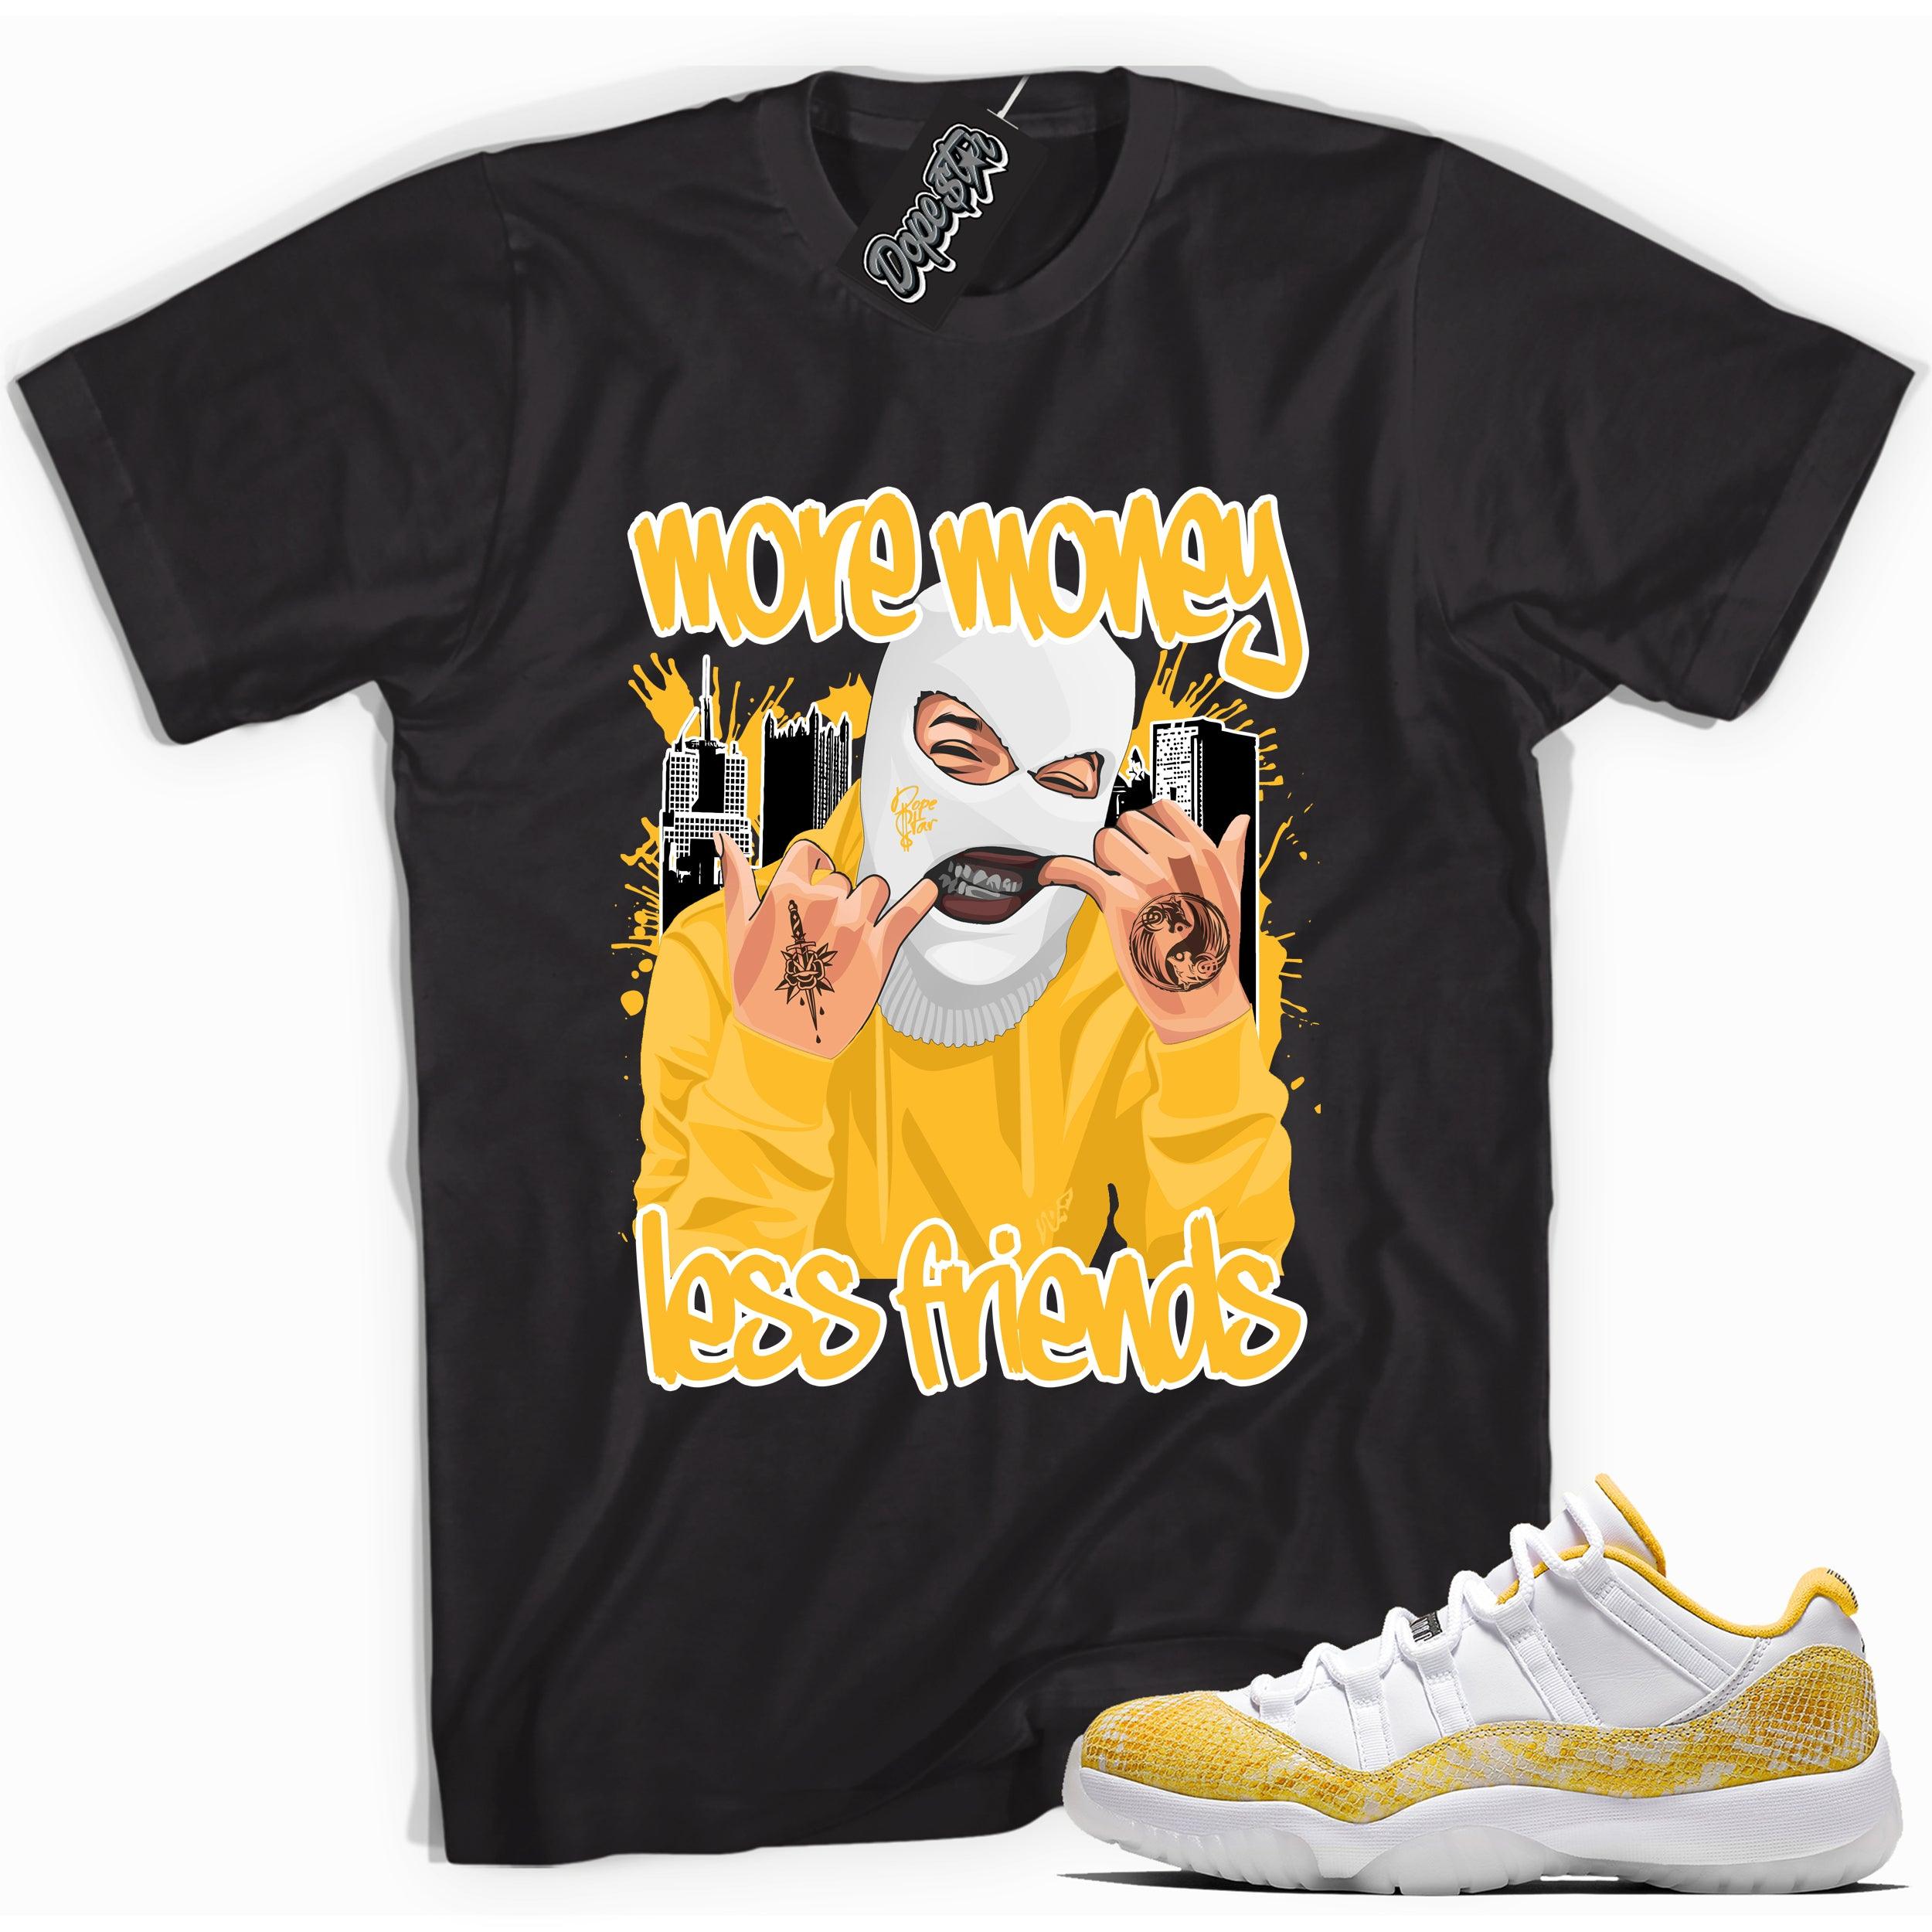 Cool black graphic tee with 'more money less friends' print, that perfectly matches  Air Jordan 11 Low Yellow Snakeskin sneakers